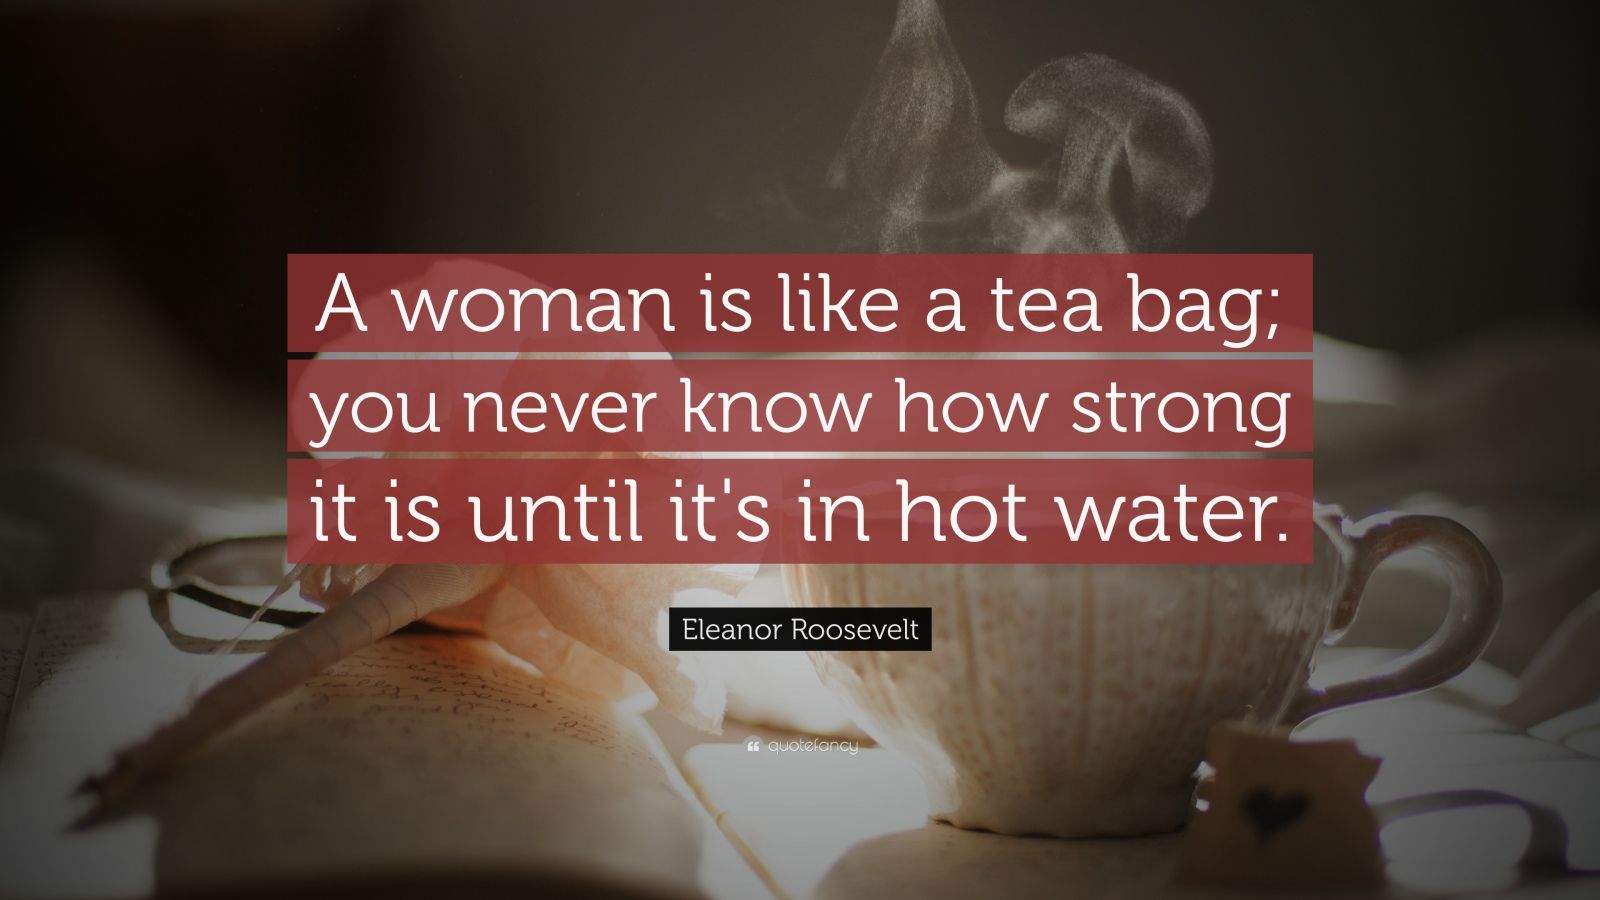 strong woman quotes